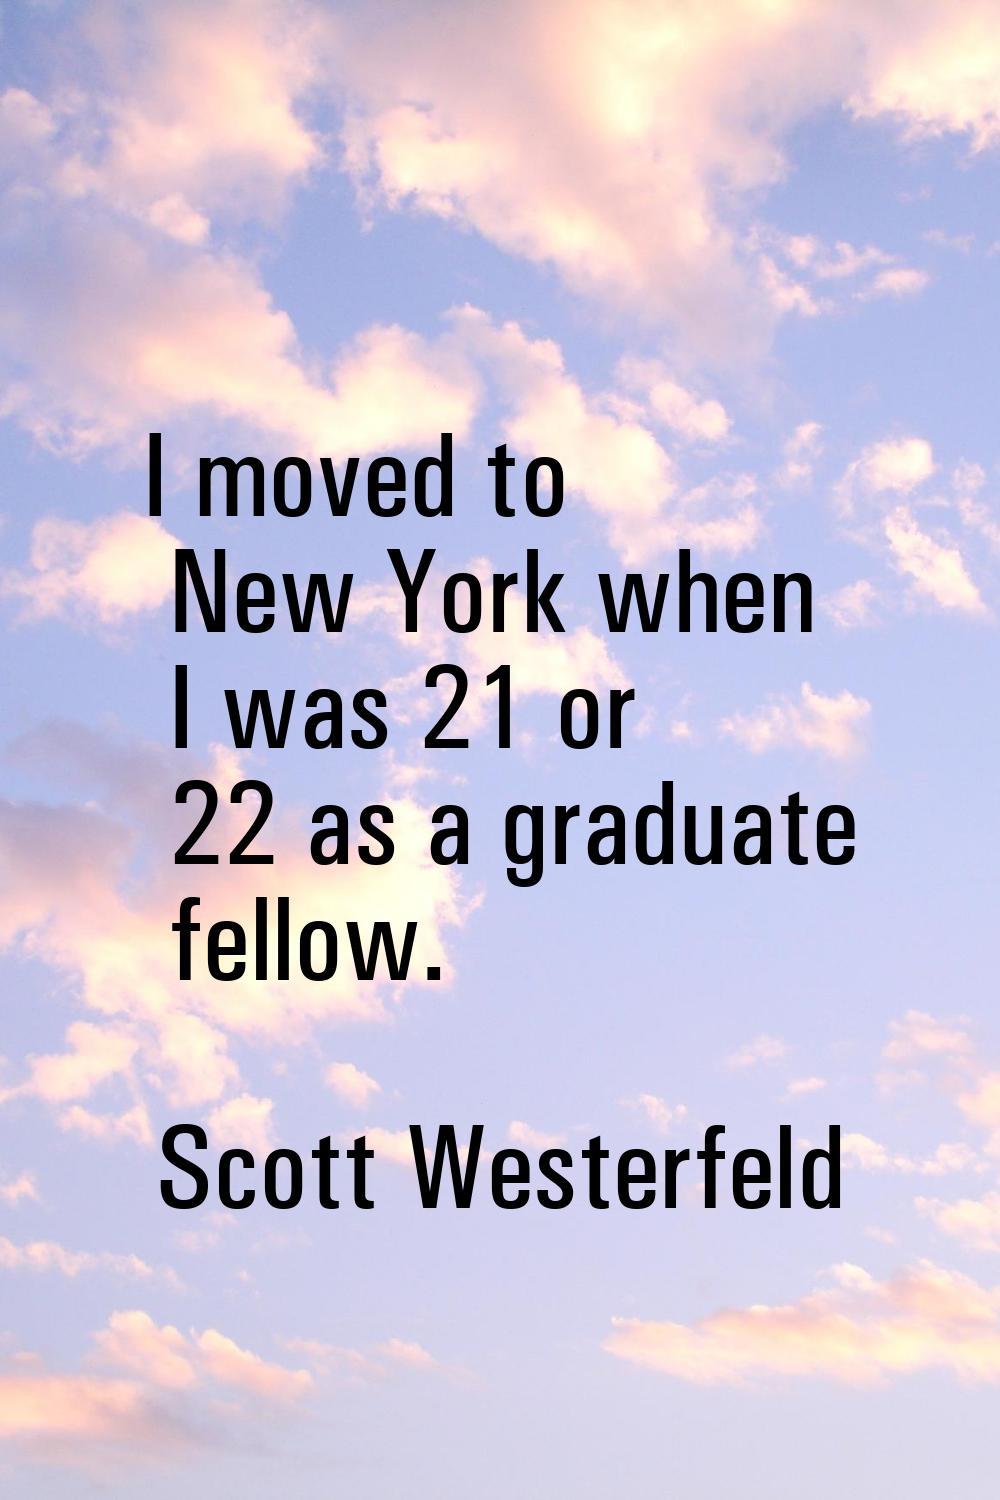 I moved to New York when I was 21 or 22 as a graduate fellow.